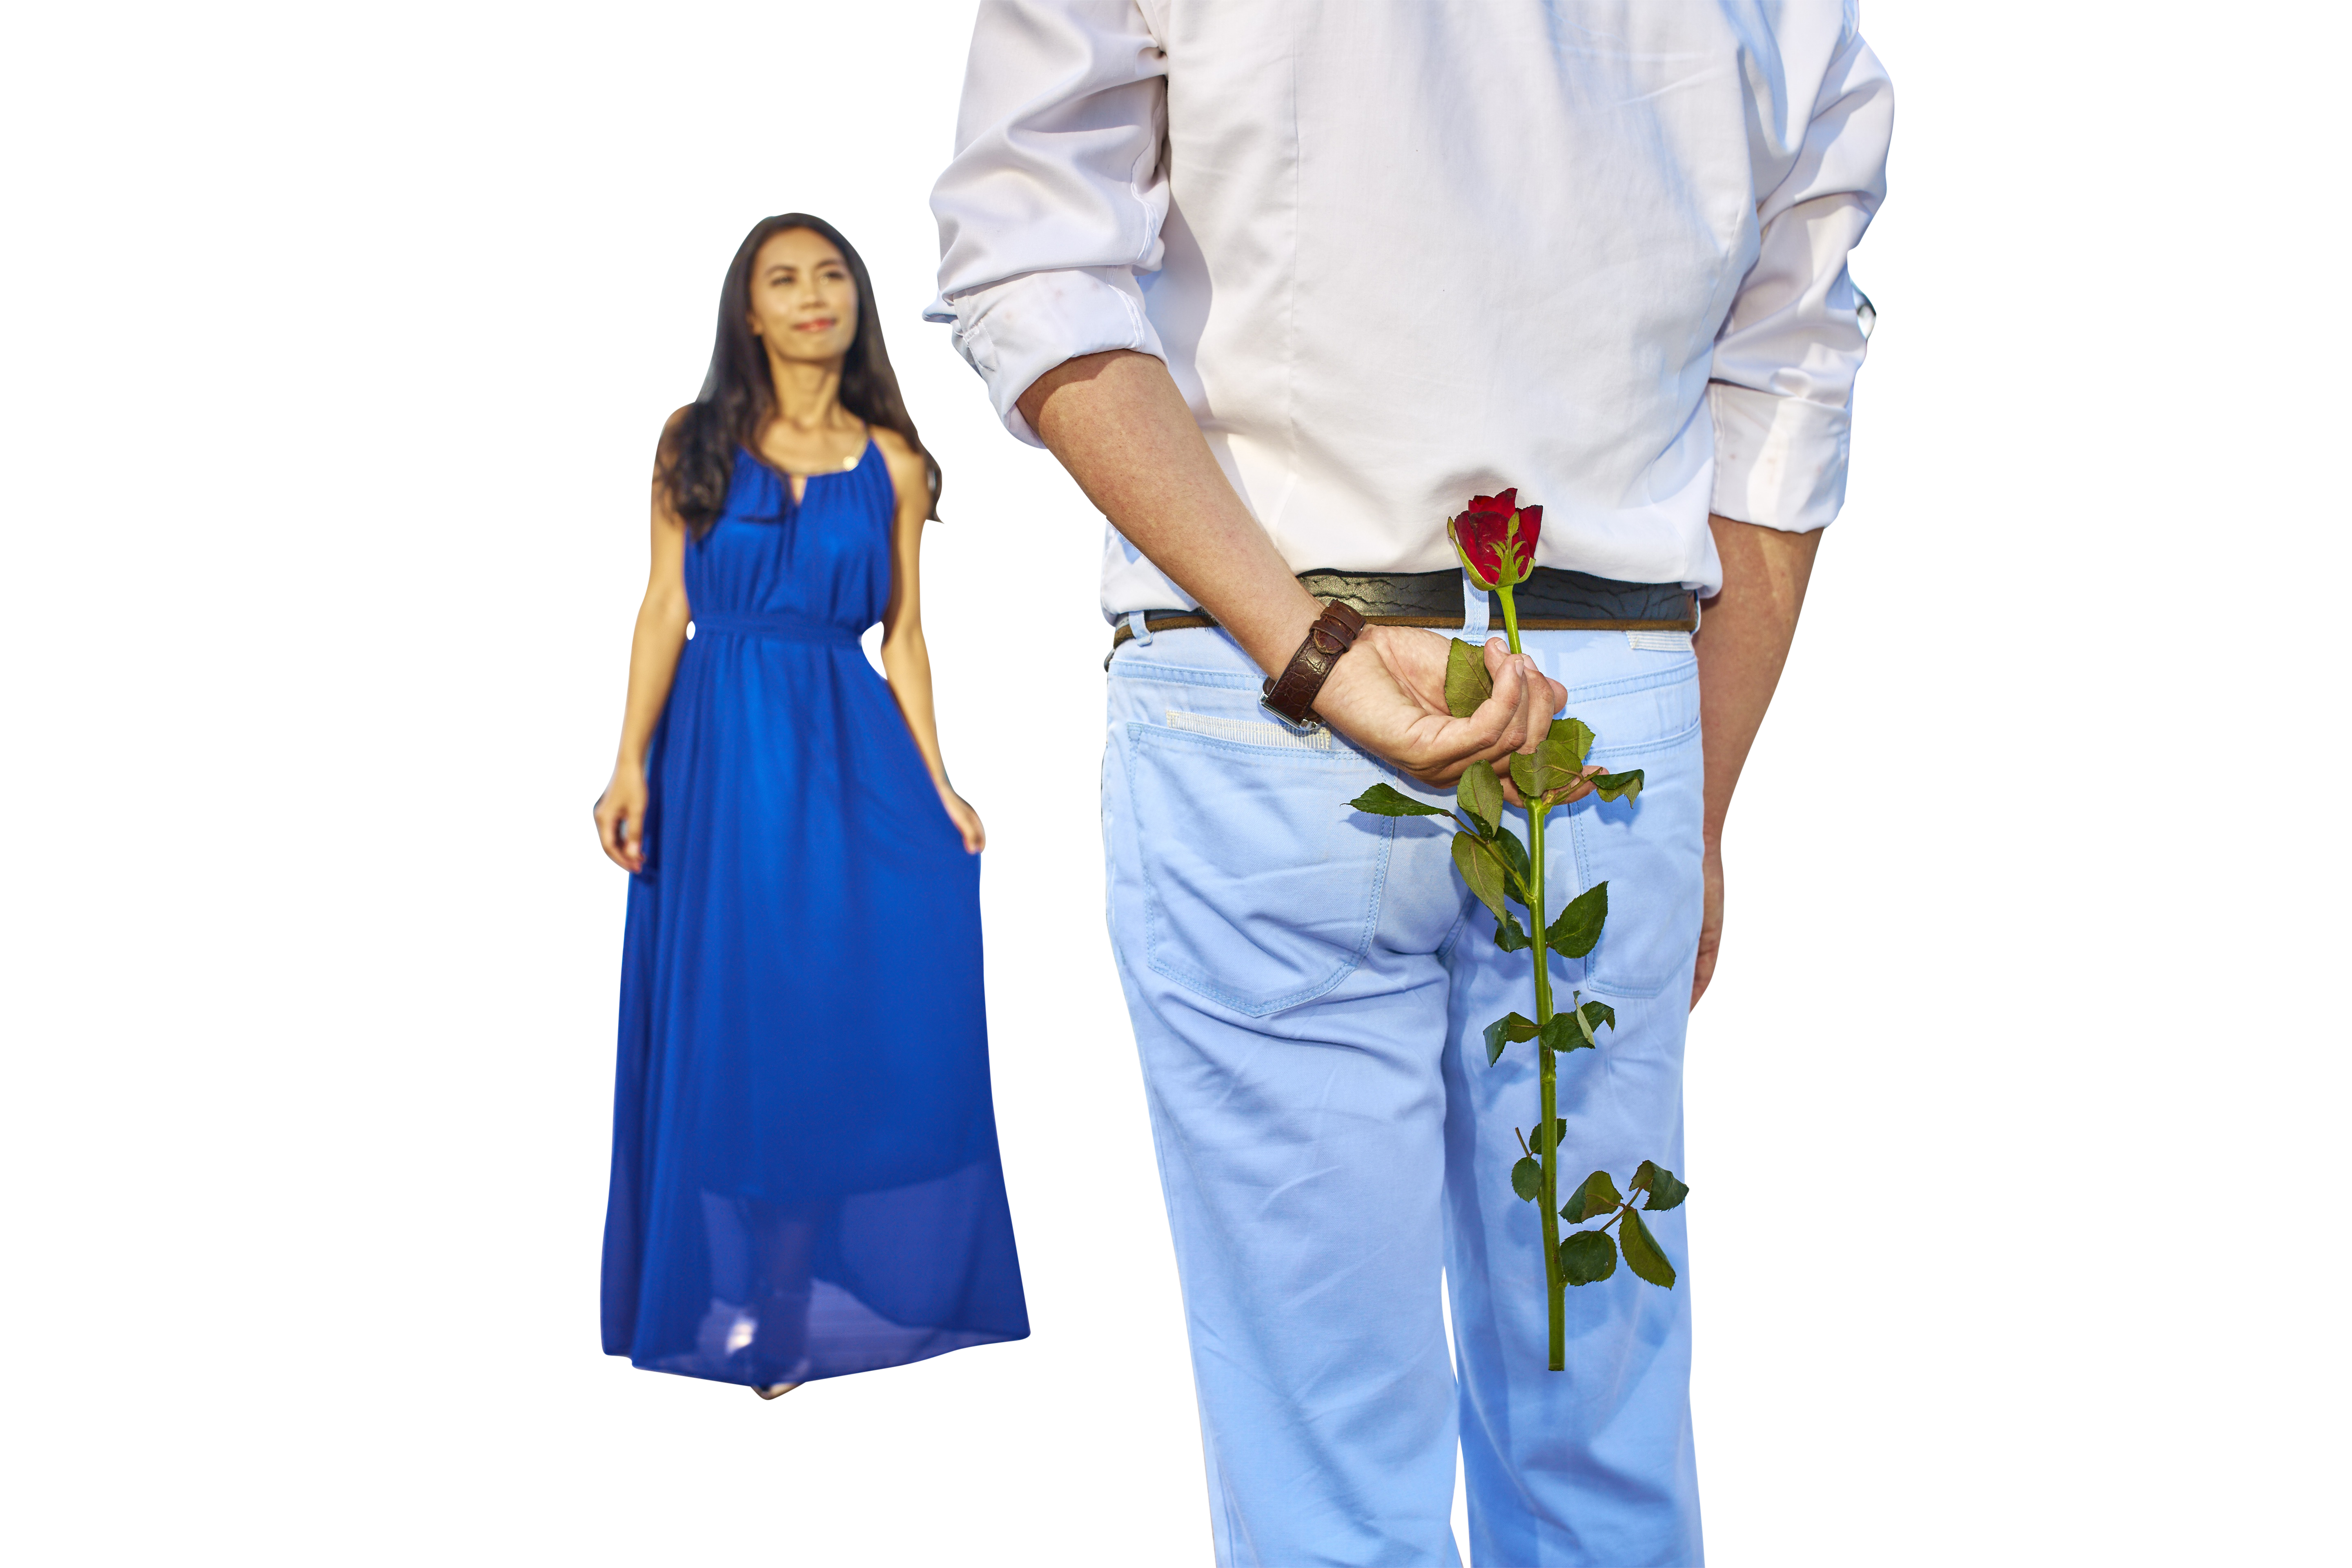 A Man Holding A Rose In His Pocket And A Woman In The Background